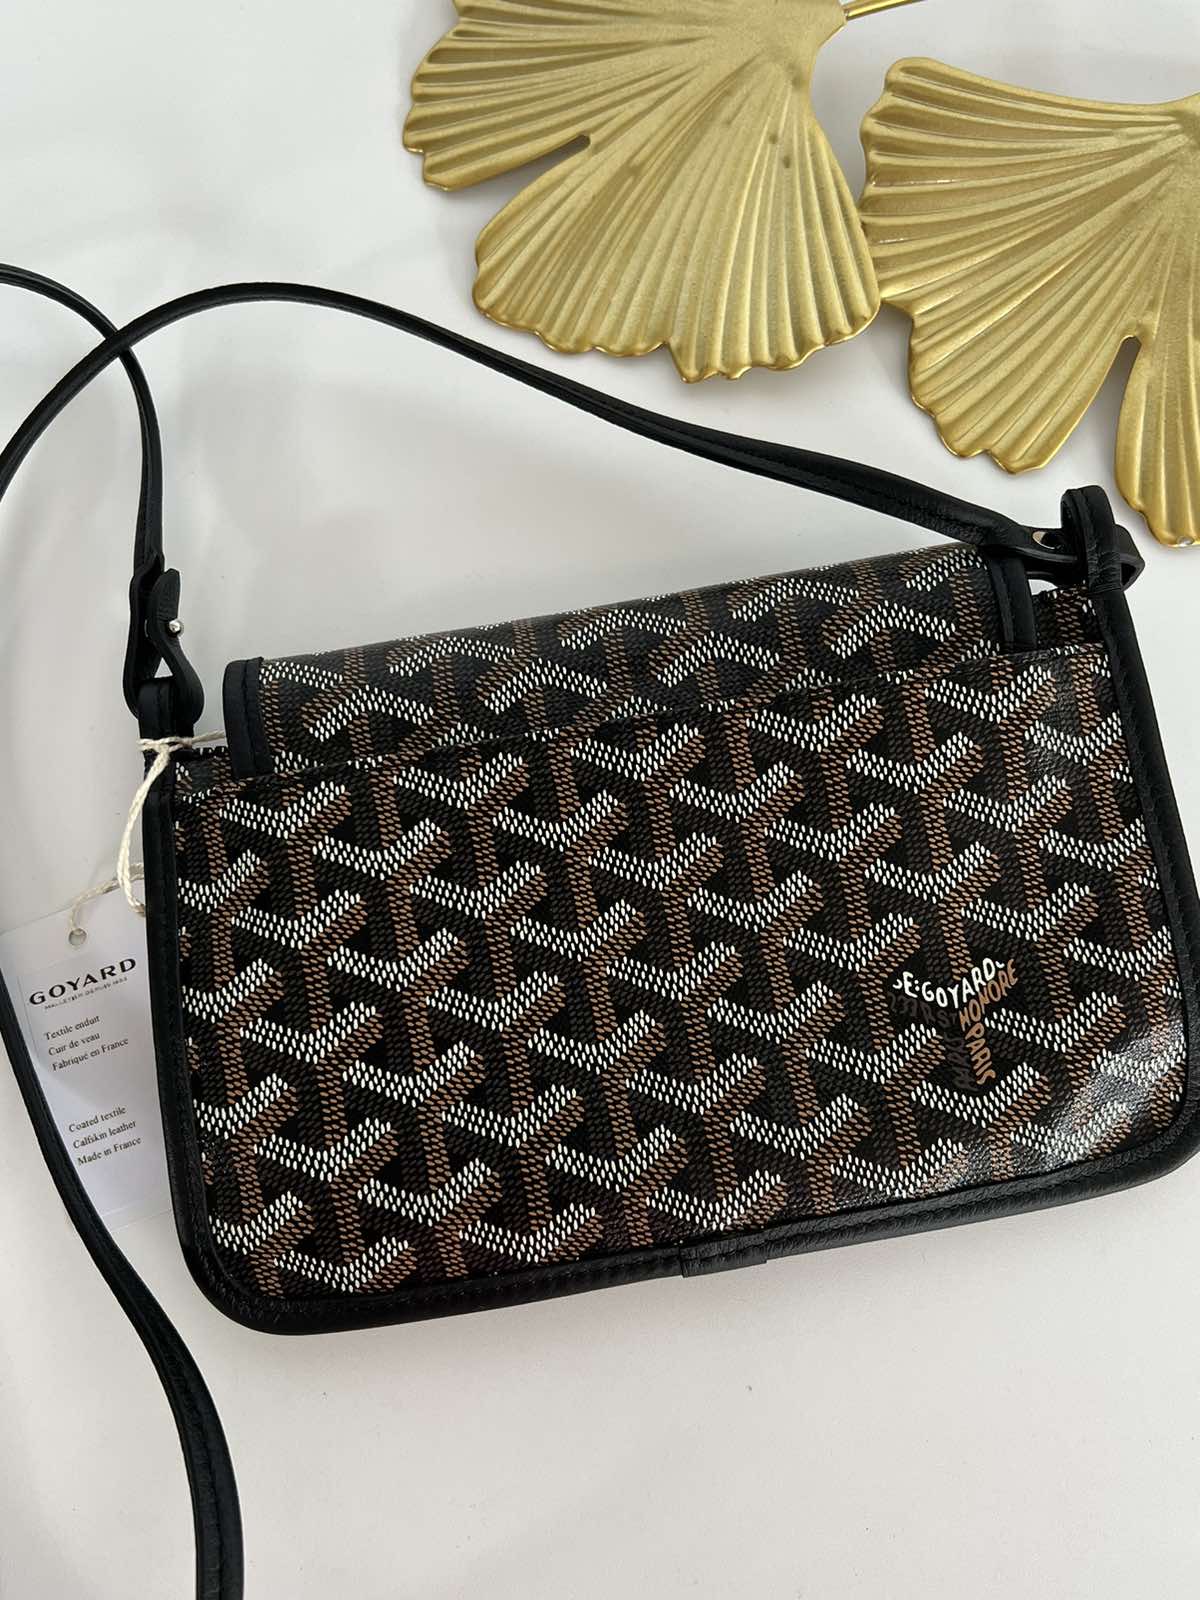 Goyard Black Plumet Wallet Clutch/Crossbody Bag. Made in France. With care  card, dustbag & certificate of authenticity from ENTRUPY ❤️